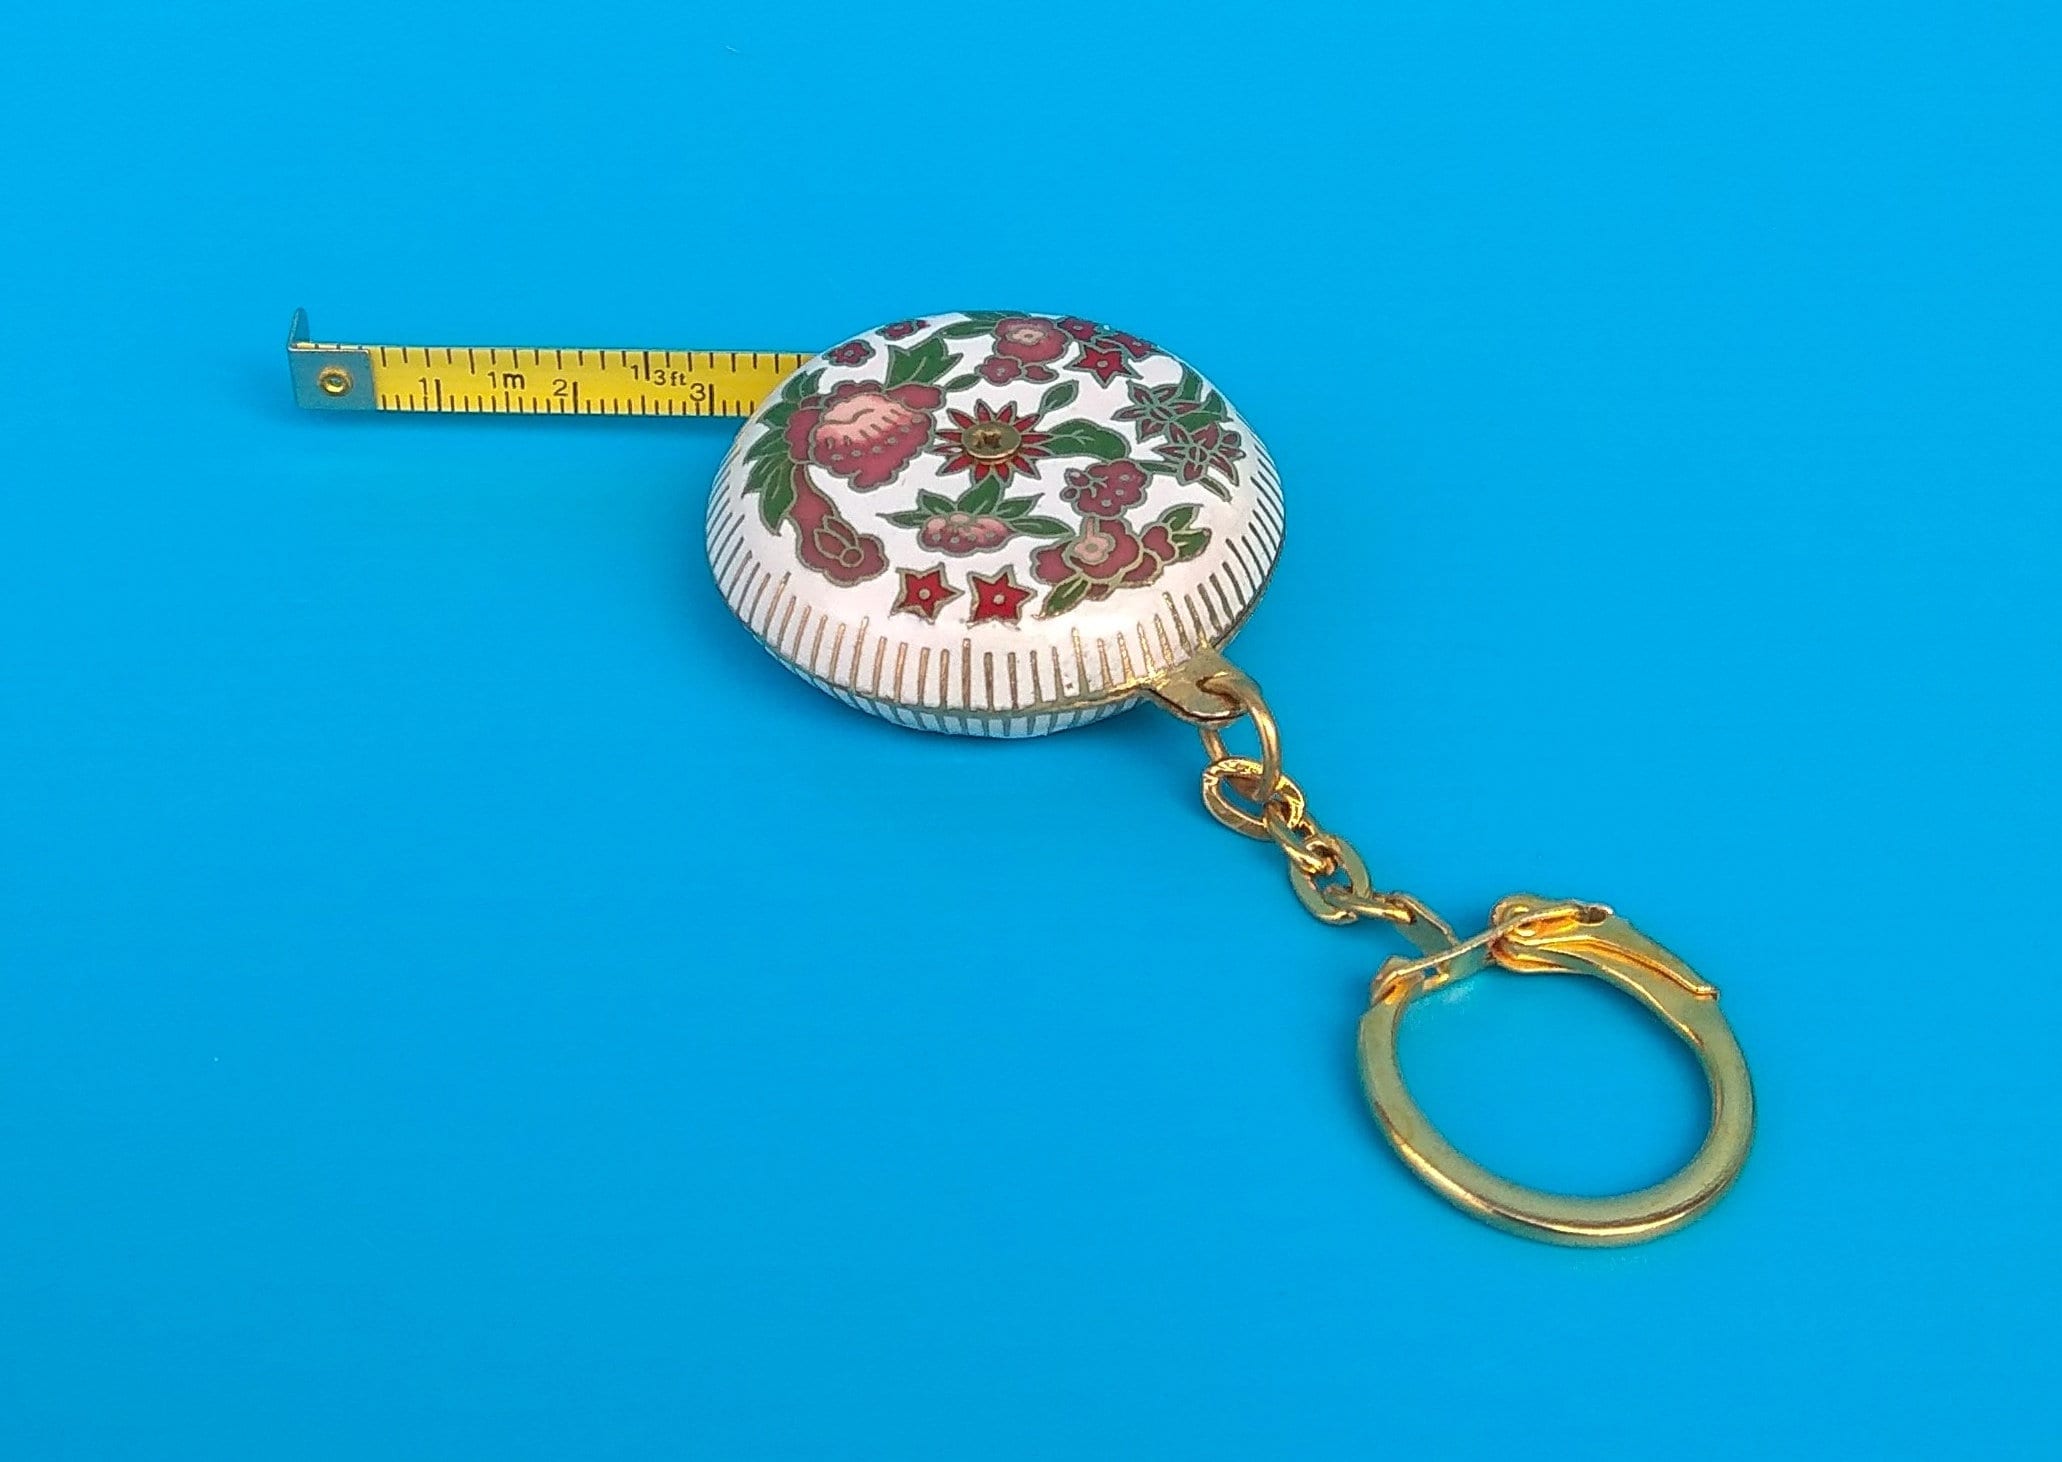 Vintage Chinese Cloisonne Mini Retractable Tape Measure & Key Chain Combo,  Gold Plated Enamel Round White, Blue Travel Pocket Measuring Tape 